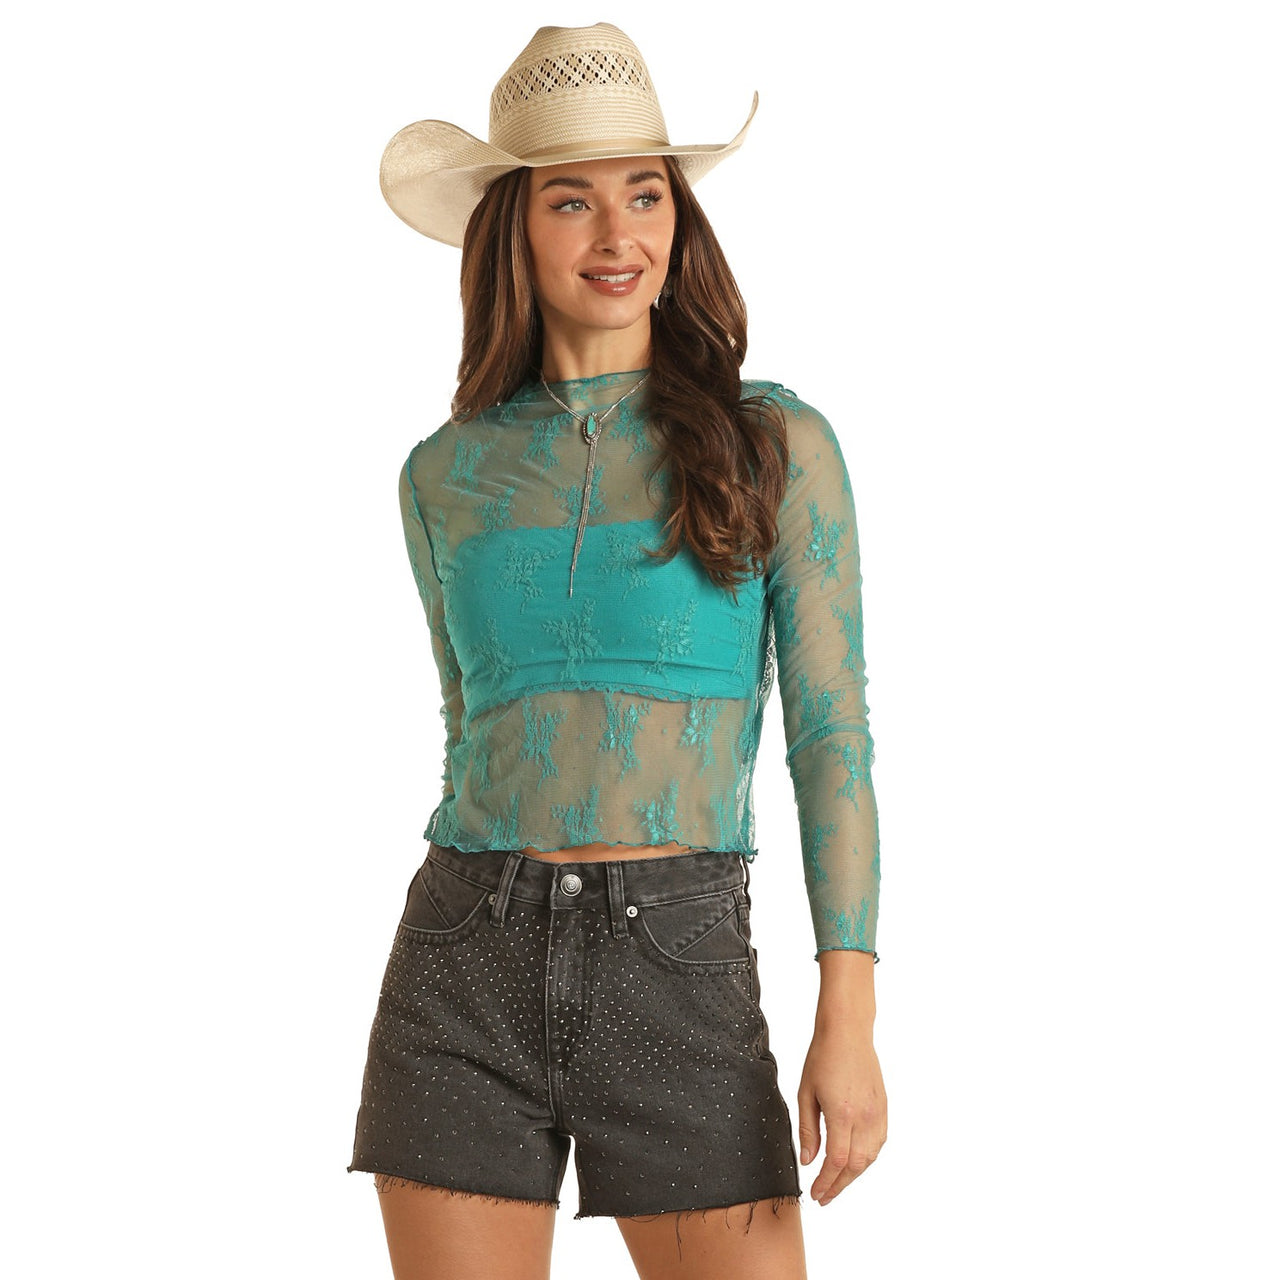 Rock & Roll Women's Mesh Lace Top - Turquoise